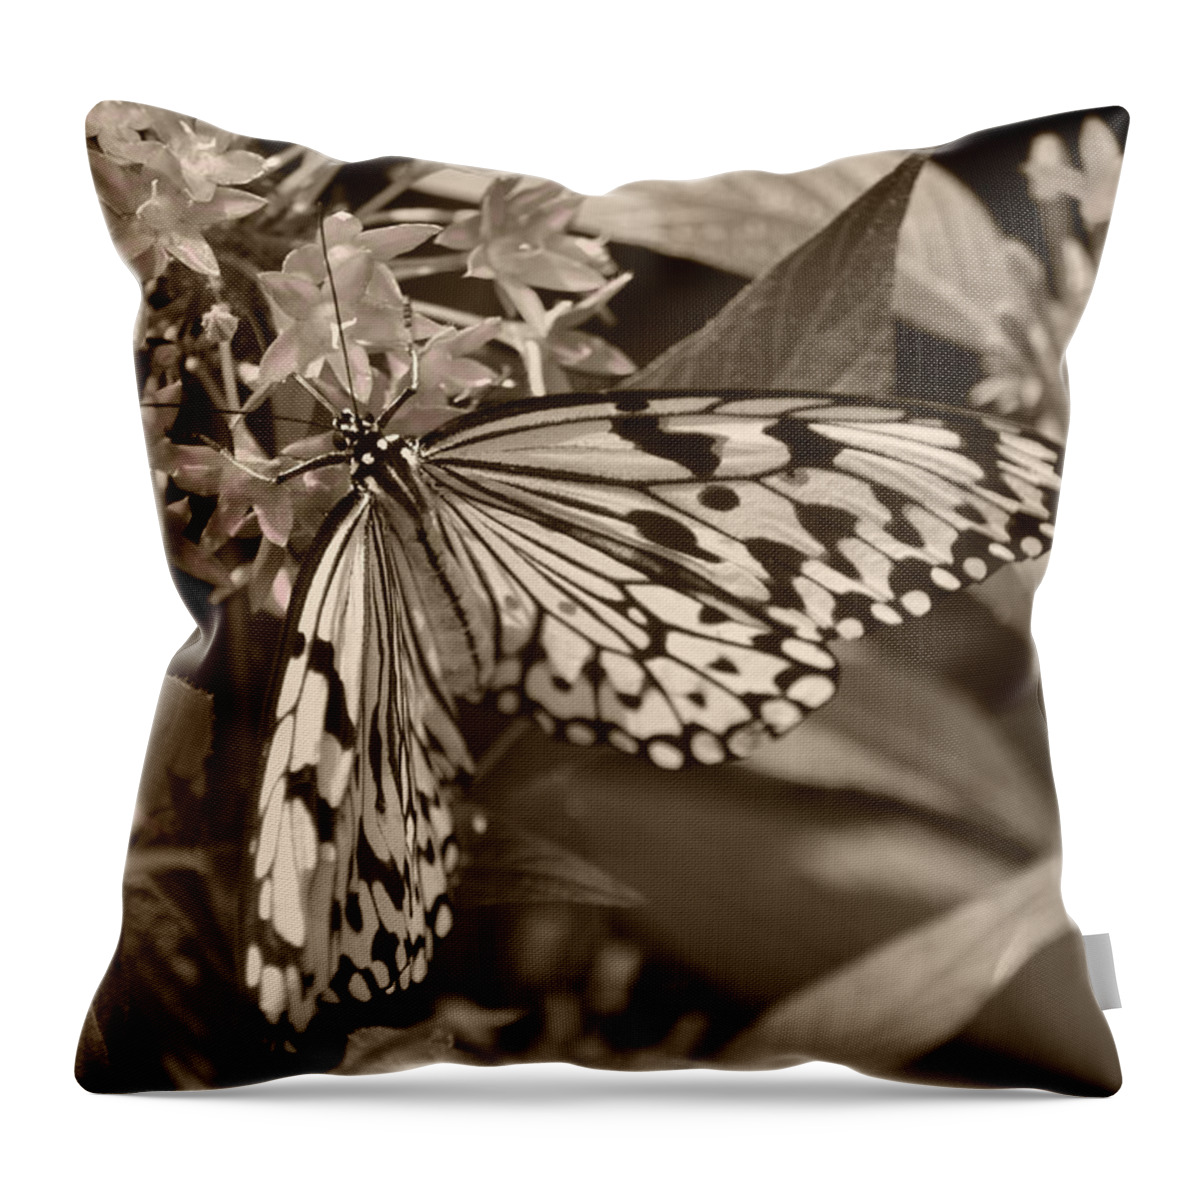 Paper Kite Throw Pillow featuring the photograph Paper Kite On Frangipani Flowers by Sandi OReilly